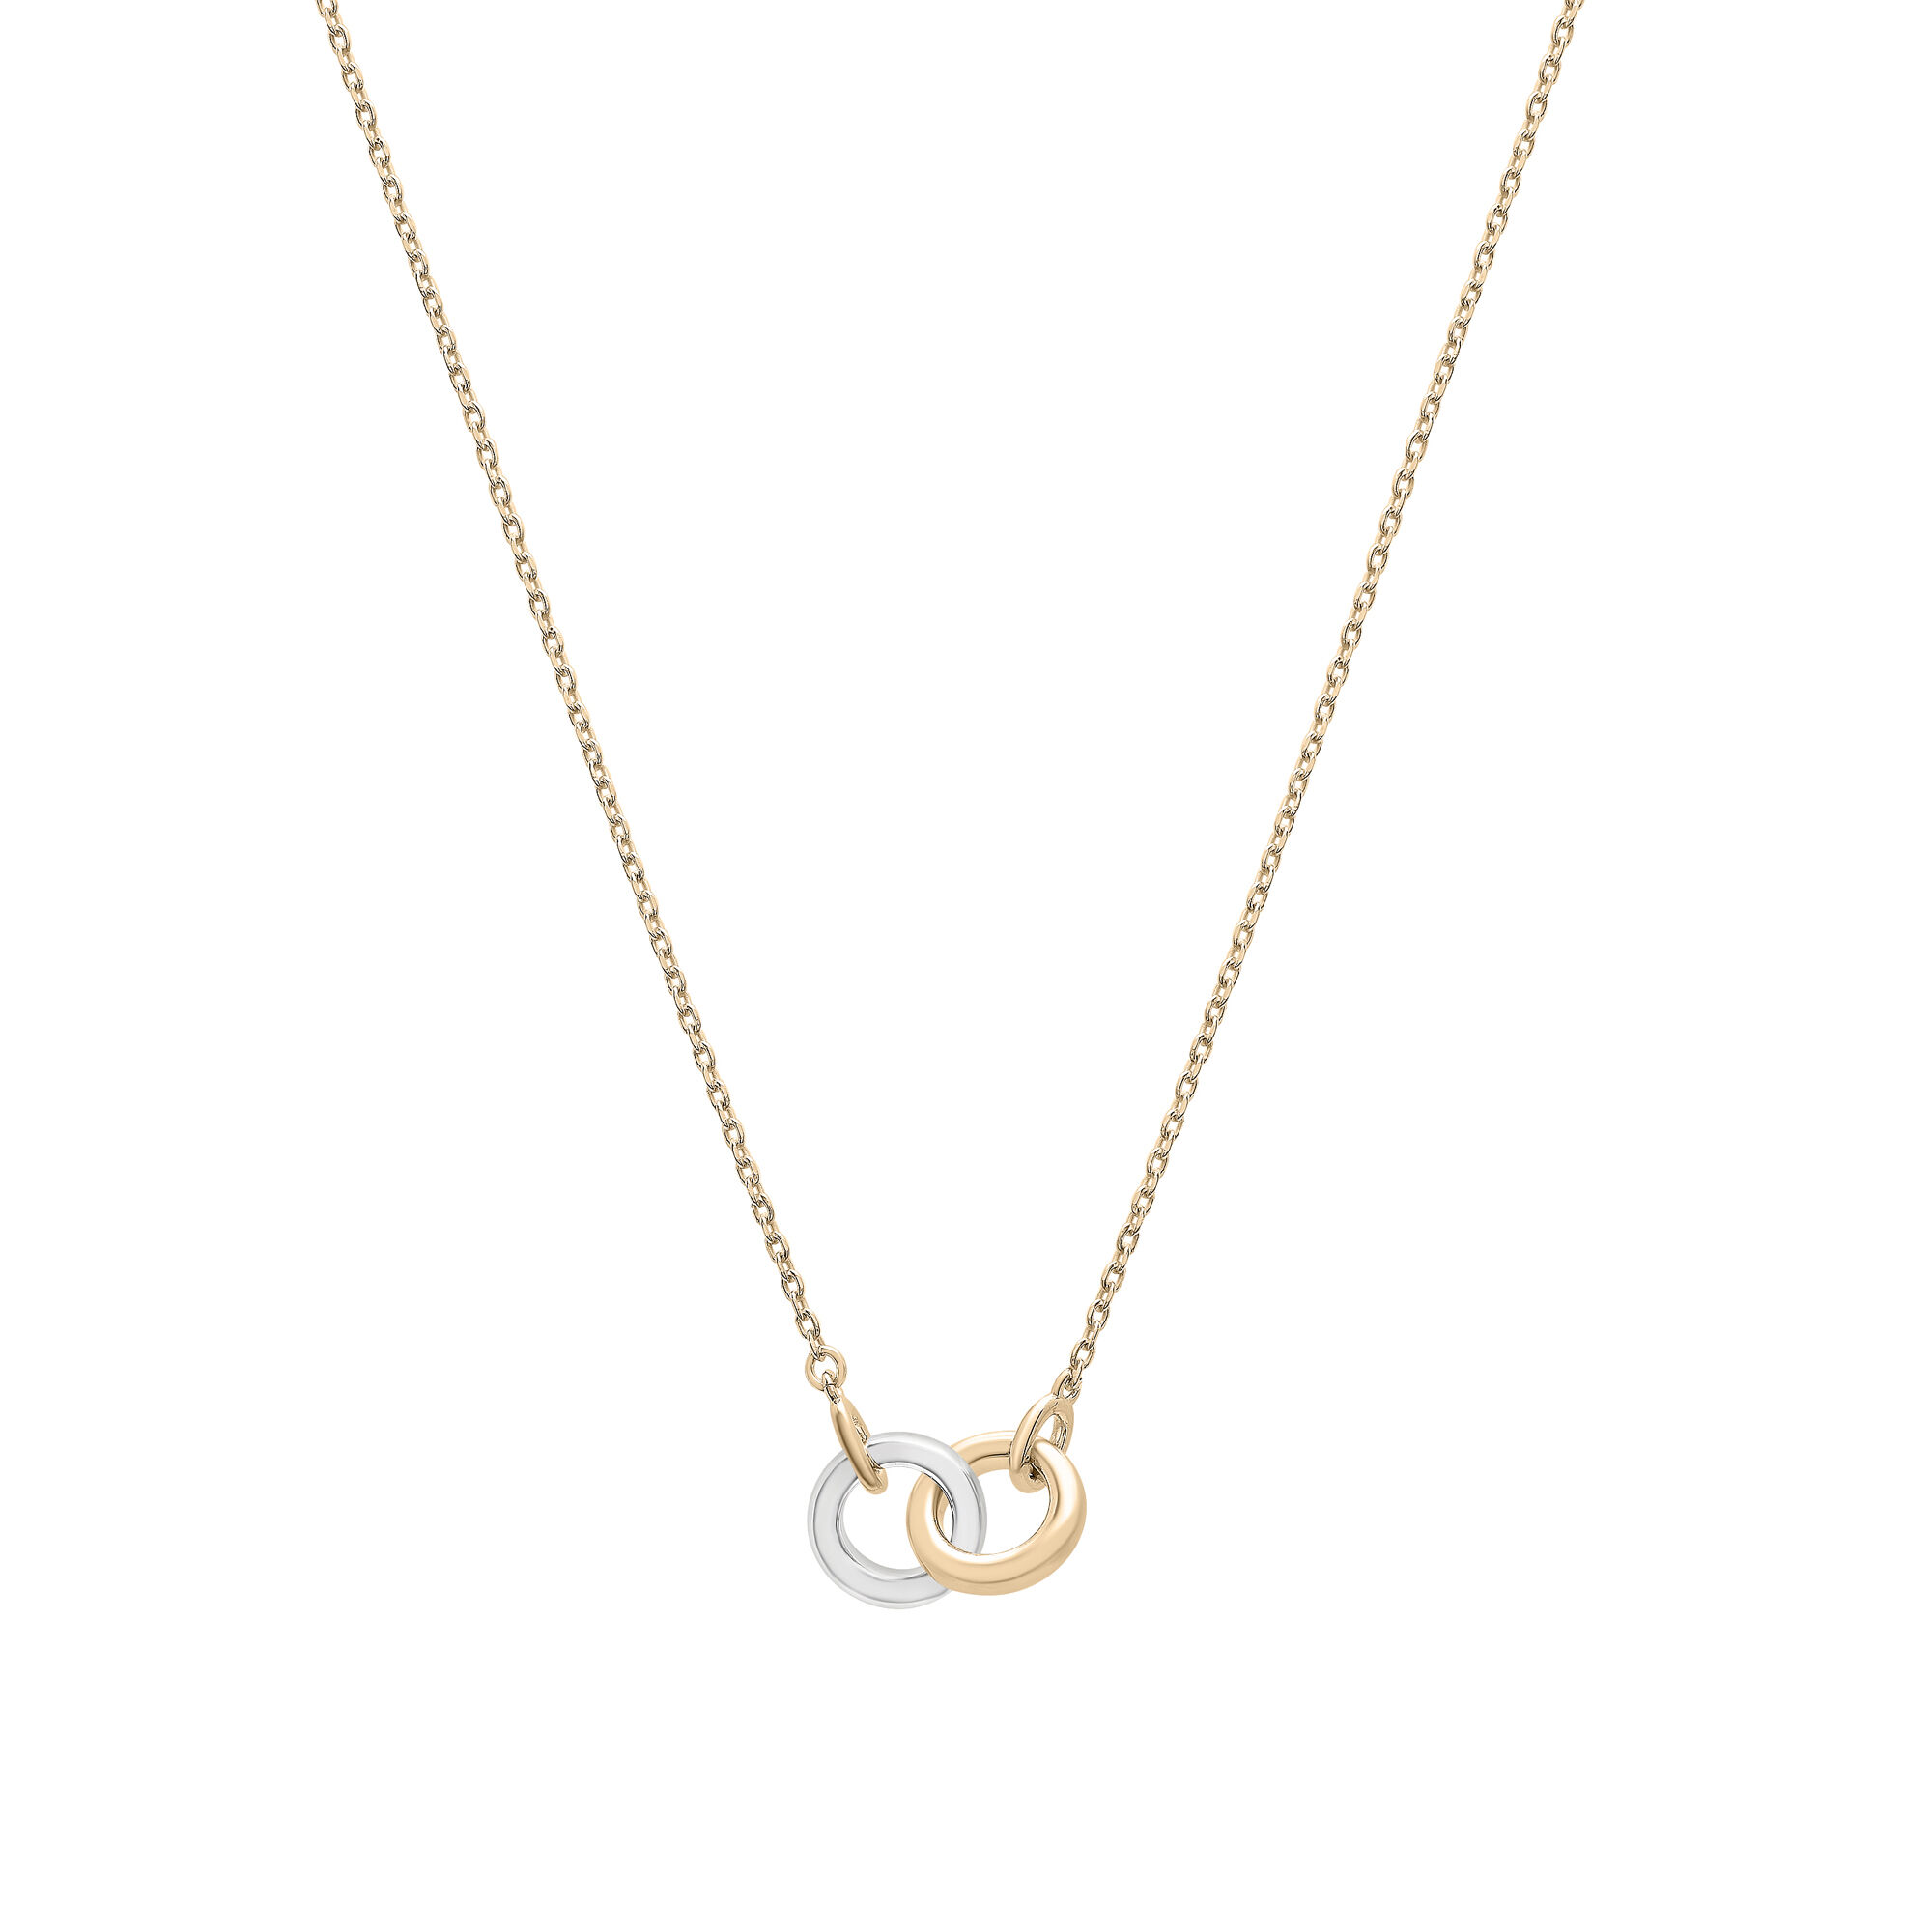 Buy Three Circle Necklace Rose Gold, Interlocking Circle Infinity Necklace  for Women, Three Best Friends Jewelry 14k Gold, Triple Circle Pendant  Online in India - Etsy